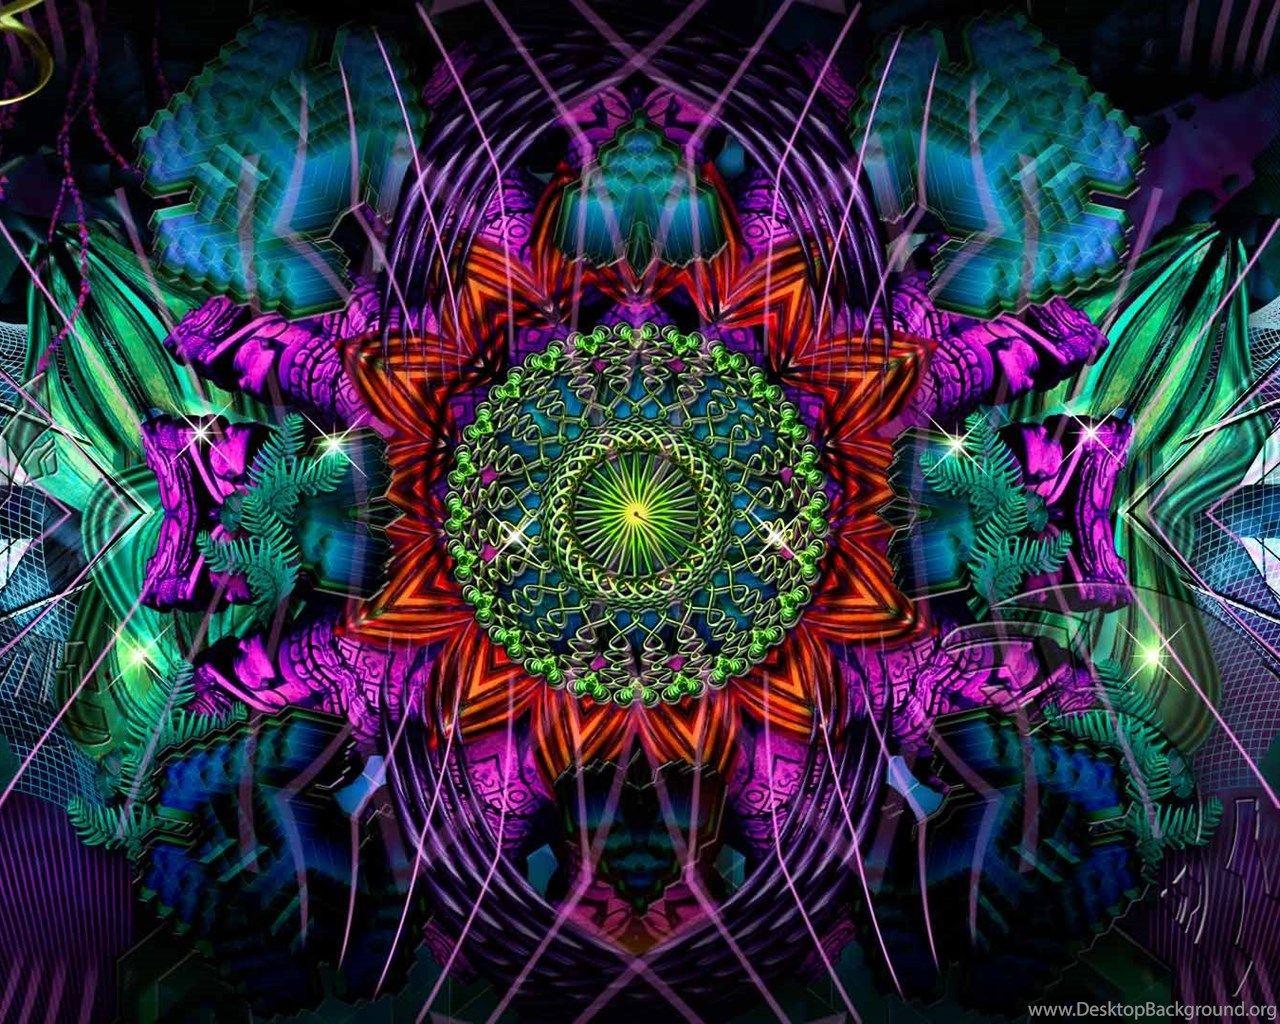 HD Psy Trance Wallpaper And Photo Desktop Background